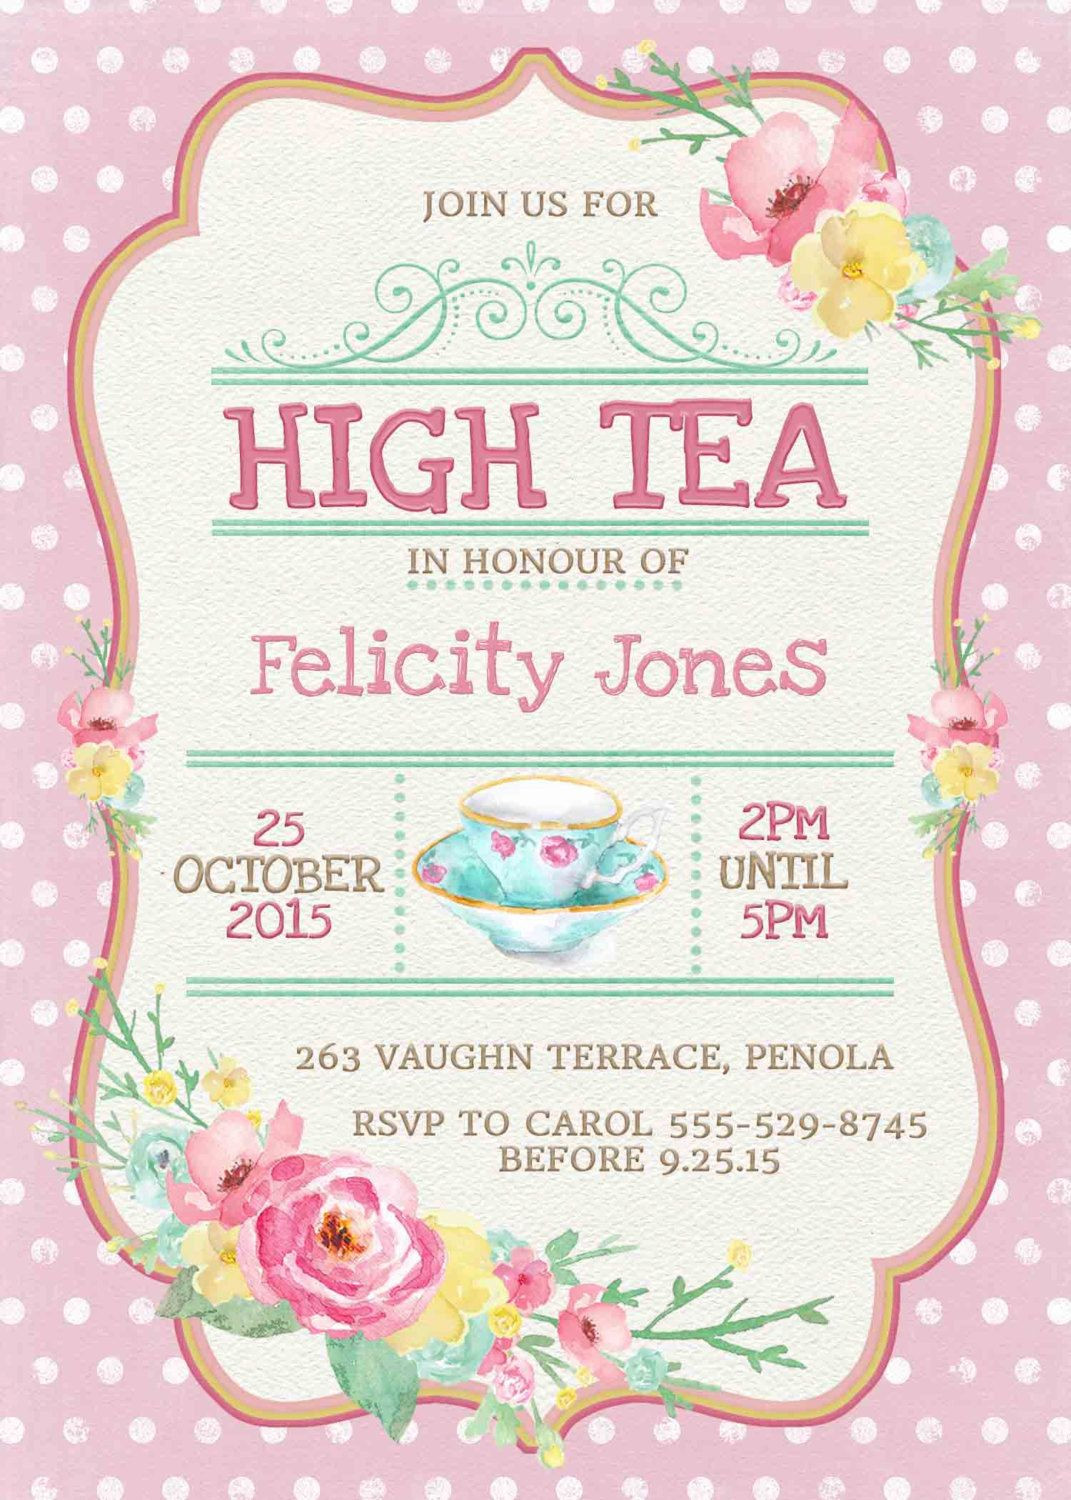 Tea Party Invitations Ideas
 Kitchen Tea Invitation or High Tea by WestminsterPaperCo